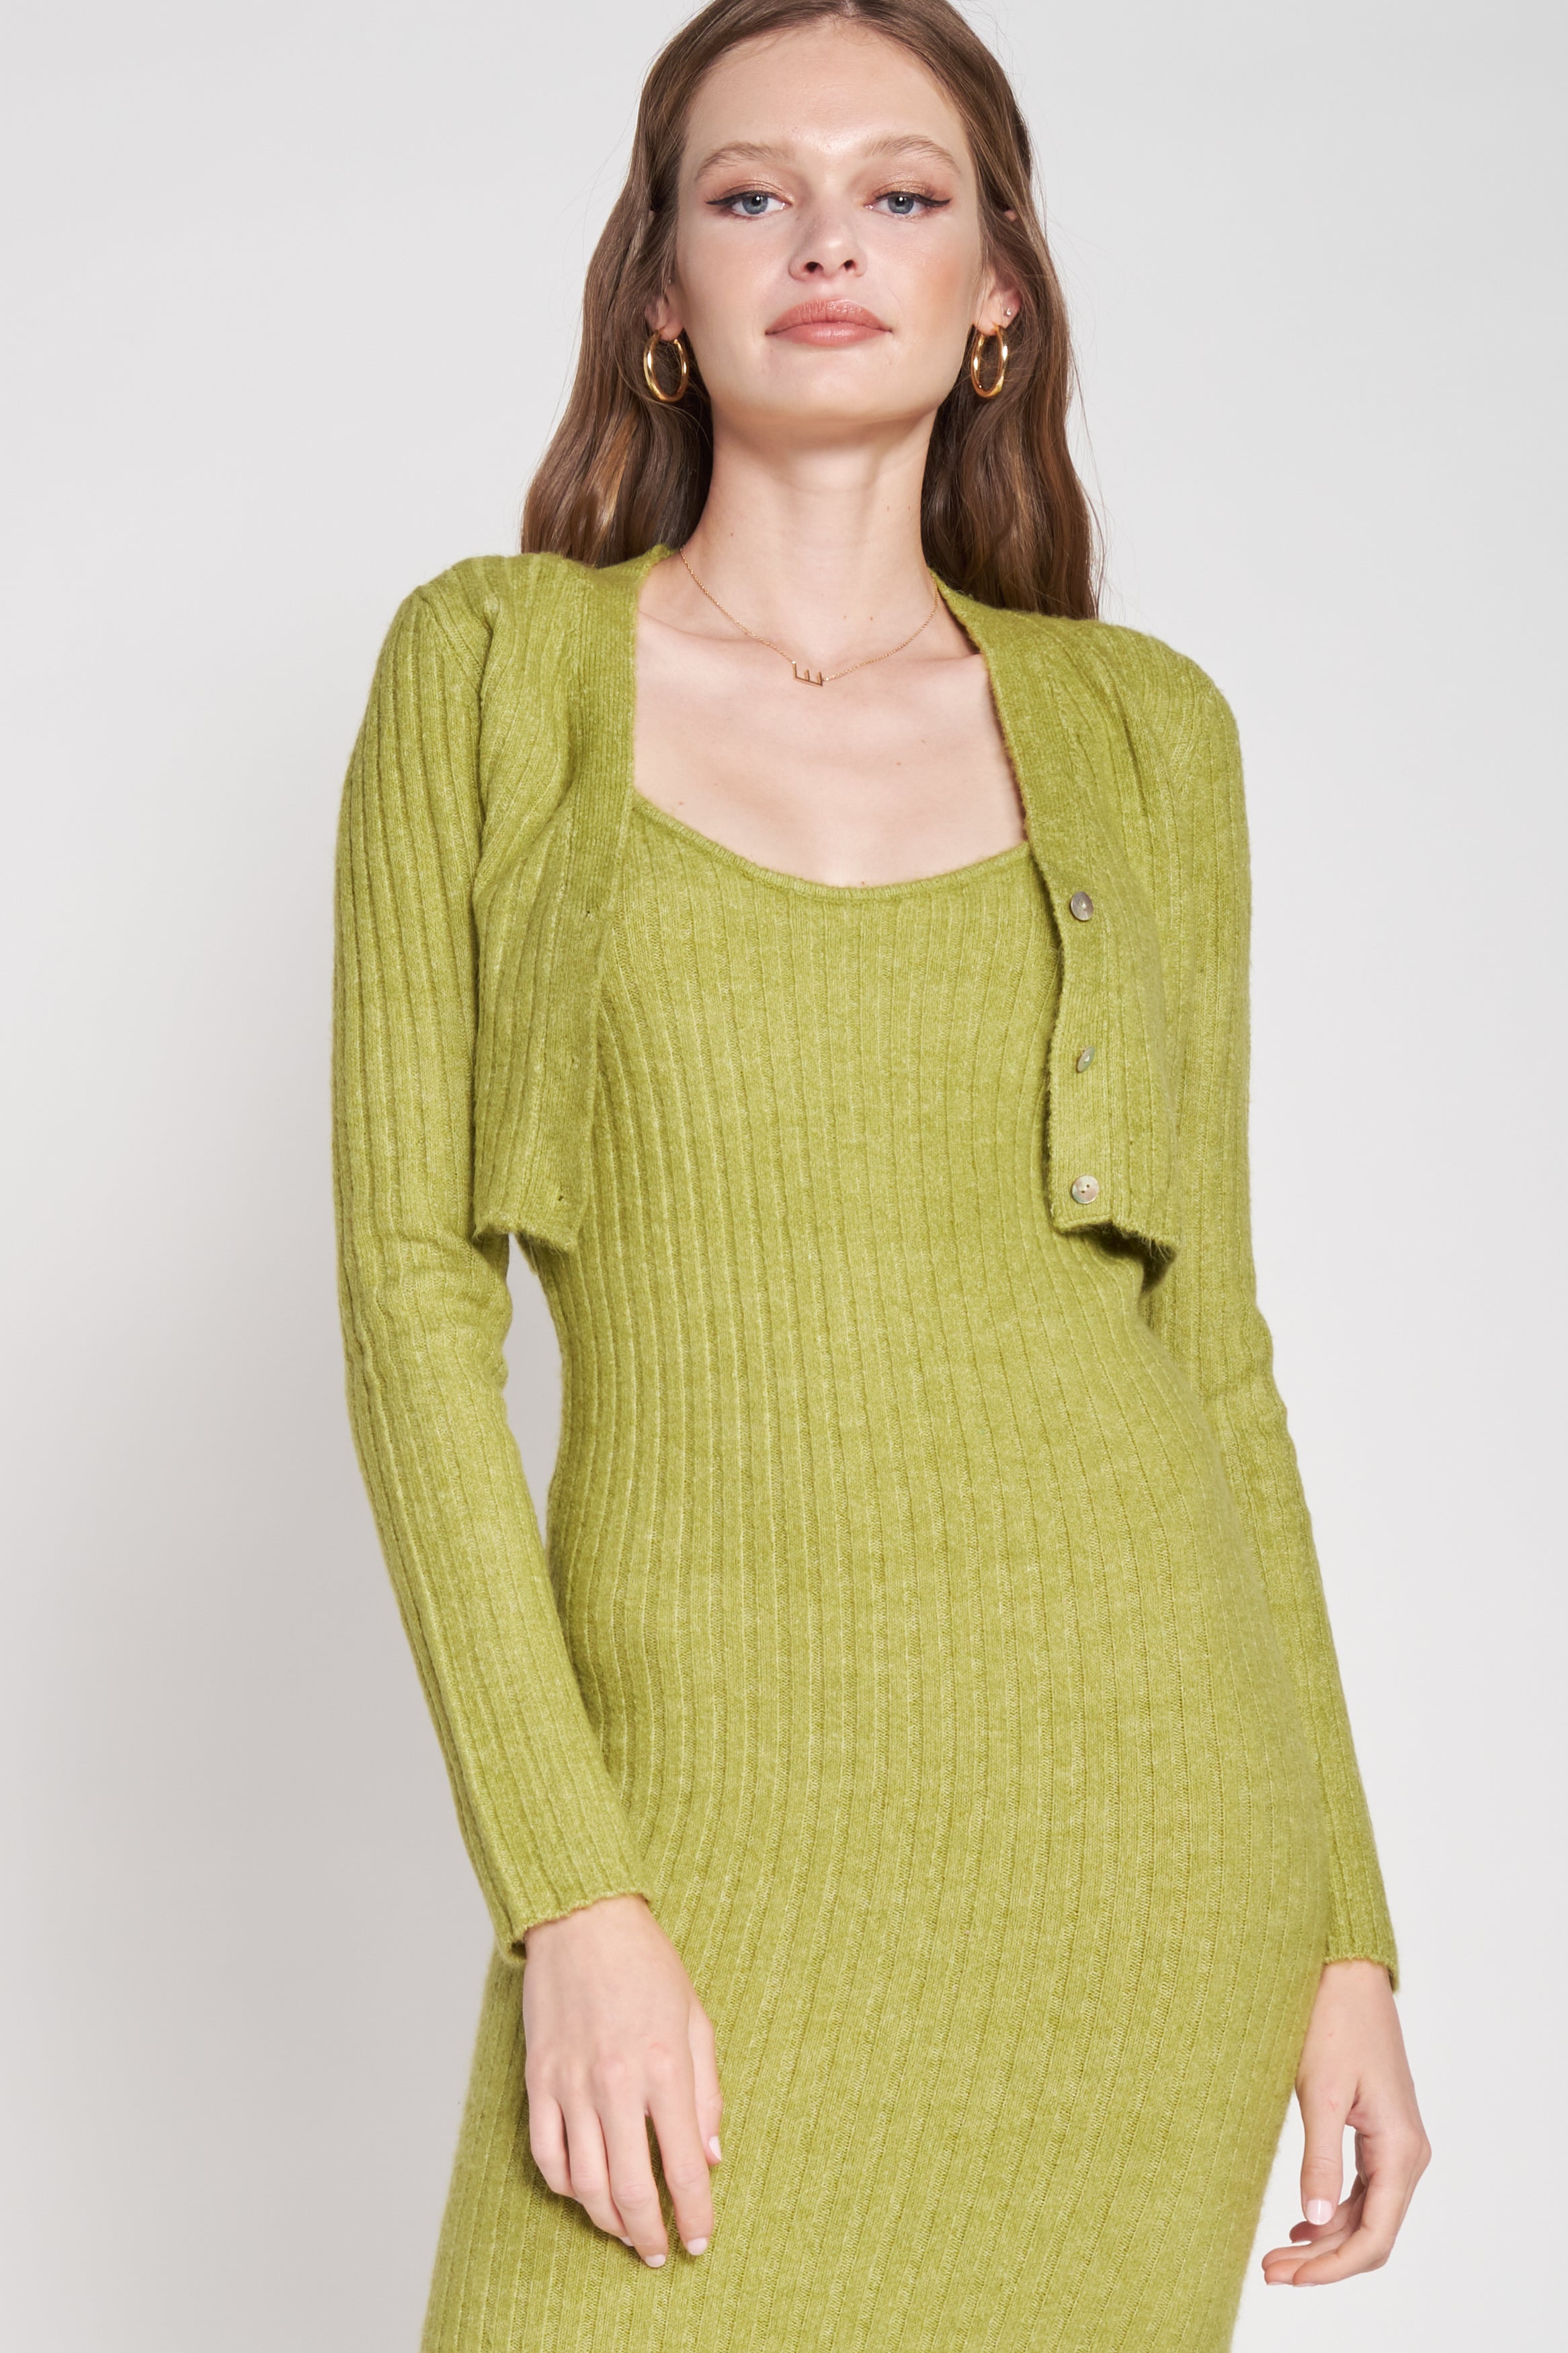 A model wearing a green two piece cardigan and midi dress set against a white wall.